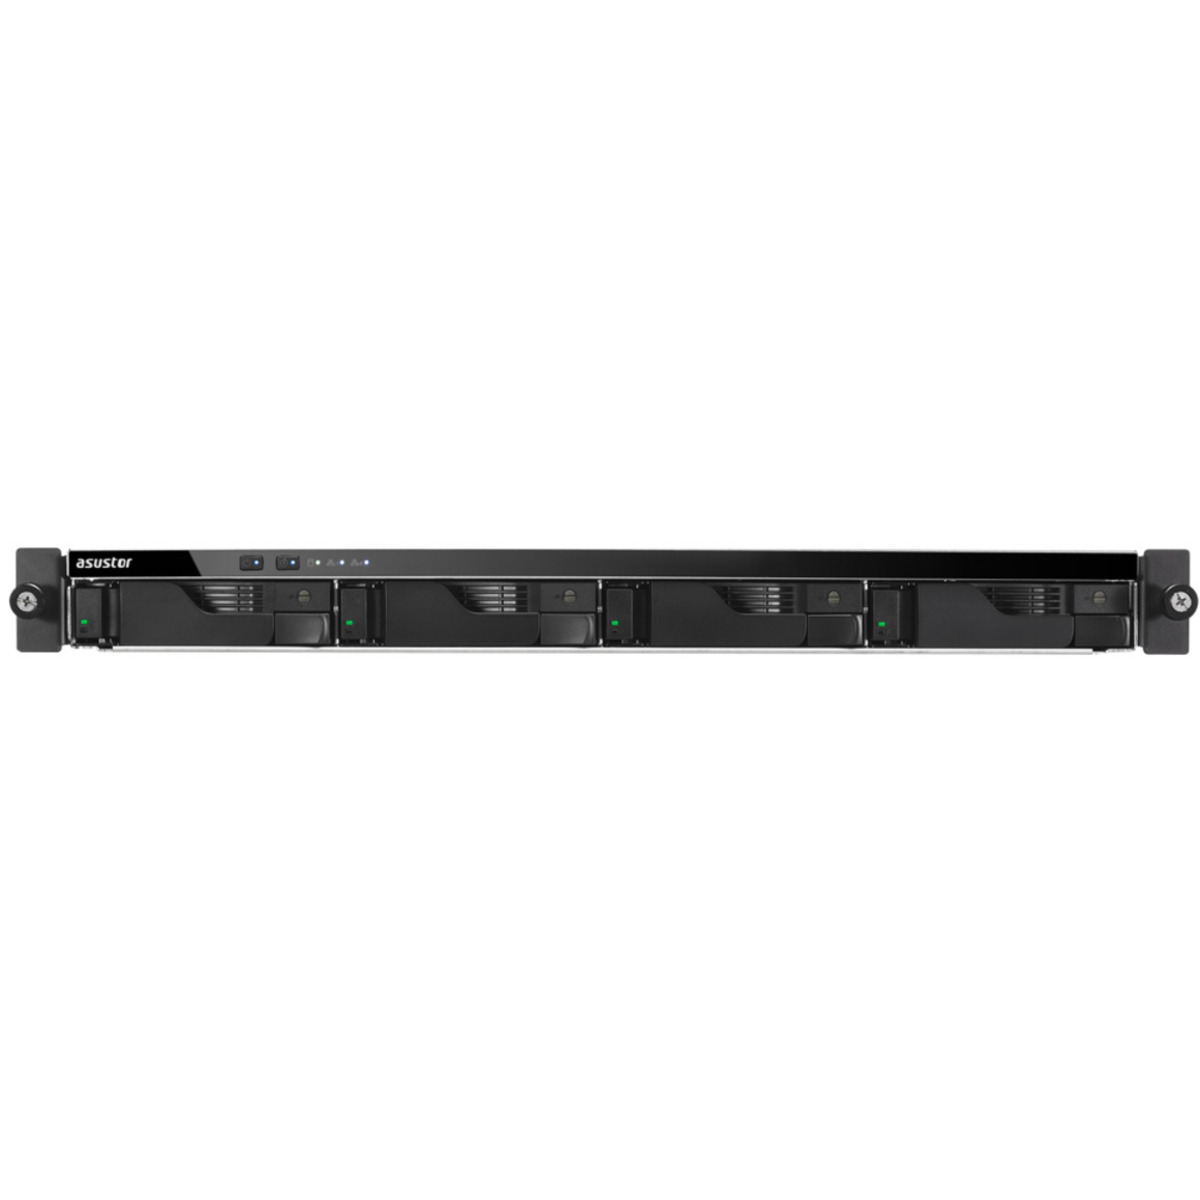 ASUSTOR LOCKERSTOR 4RD AS6504RD 32tb 4-Bay RackMount Multimedia / Power User / Business NAS - Network Attached Storage Device 2x16tb Western Digital Gold WD161KRYZ 3.5 7200rpm SATA 6Gb/s HDD ENTERPRISE Class Drives Installed - Burn-In Tested - FREE RAM UPGRADE LOCKERSTOR 4RD AS6504RD